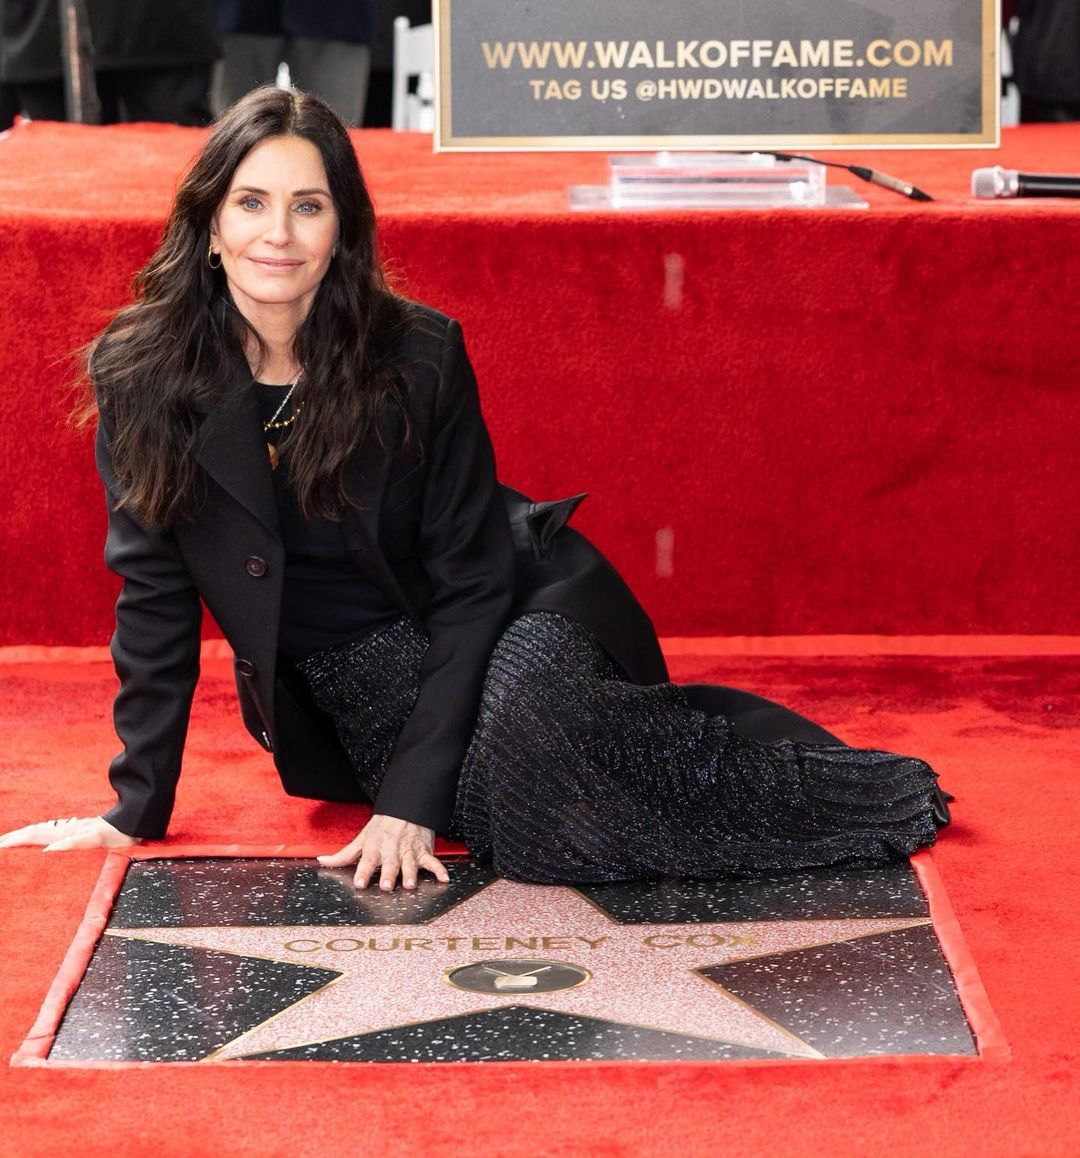 Courteney Cox’s Hollywood Walk Of Fame Star